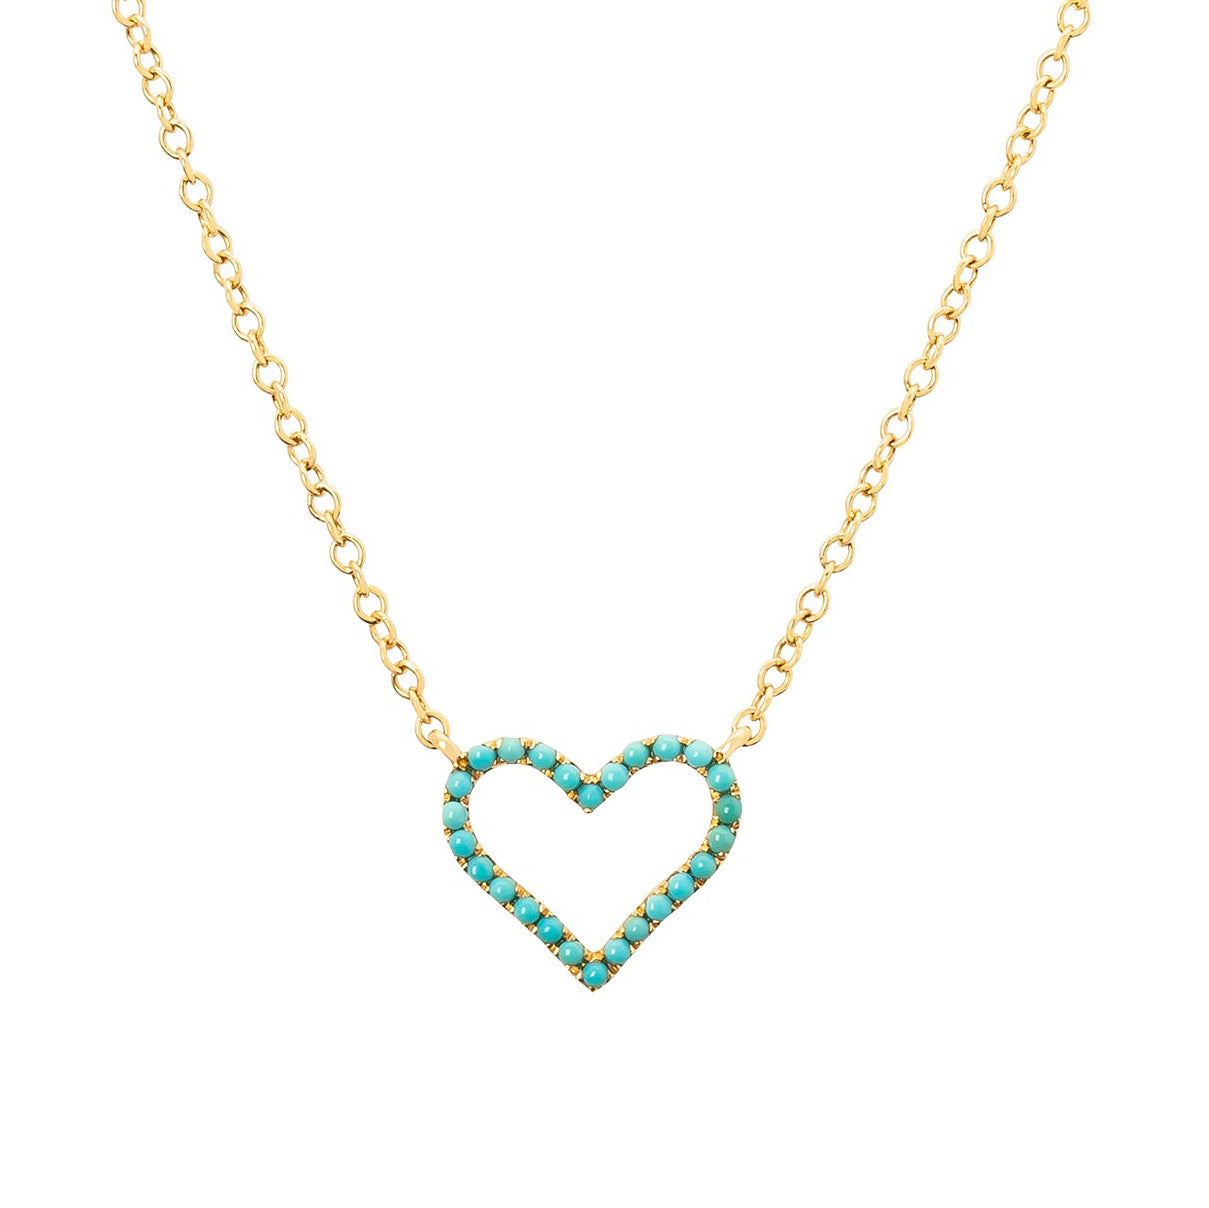 TURQUOISE HEART CHARM NECKLACE